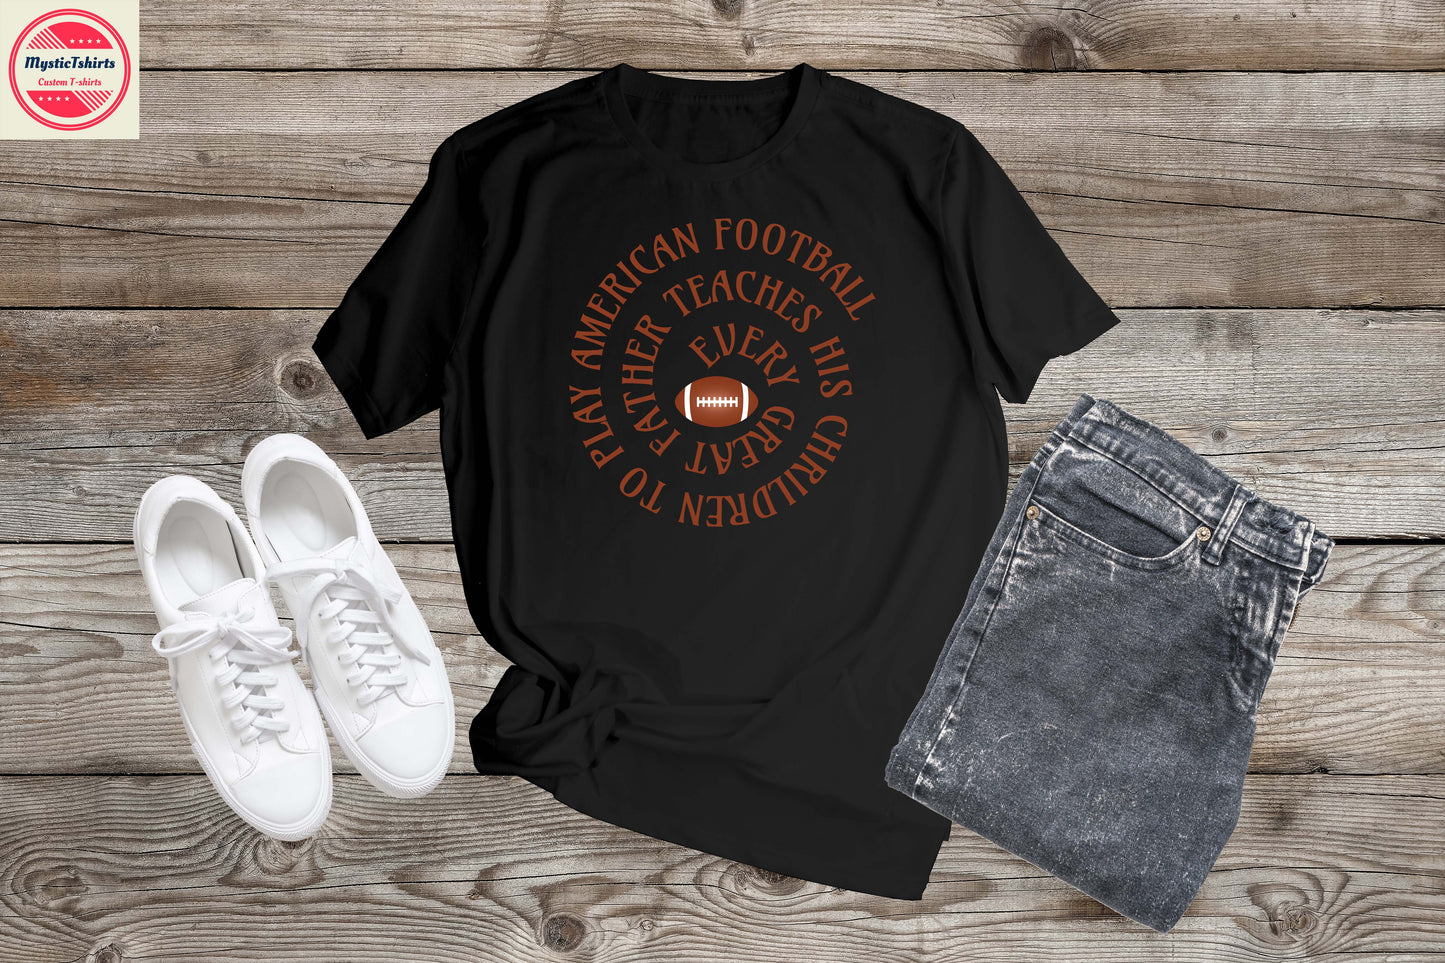 139. EVERY GREAT FATHER TEACHES HIS CHILDREN TO PLAY AMERICAN FOOTBALL, Custom Made Shirt, Personalized T-Shirt, Custom Text, Make Your Own Shirt, Custom Tee